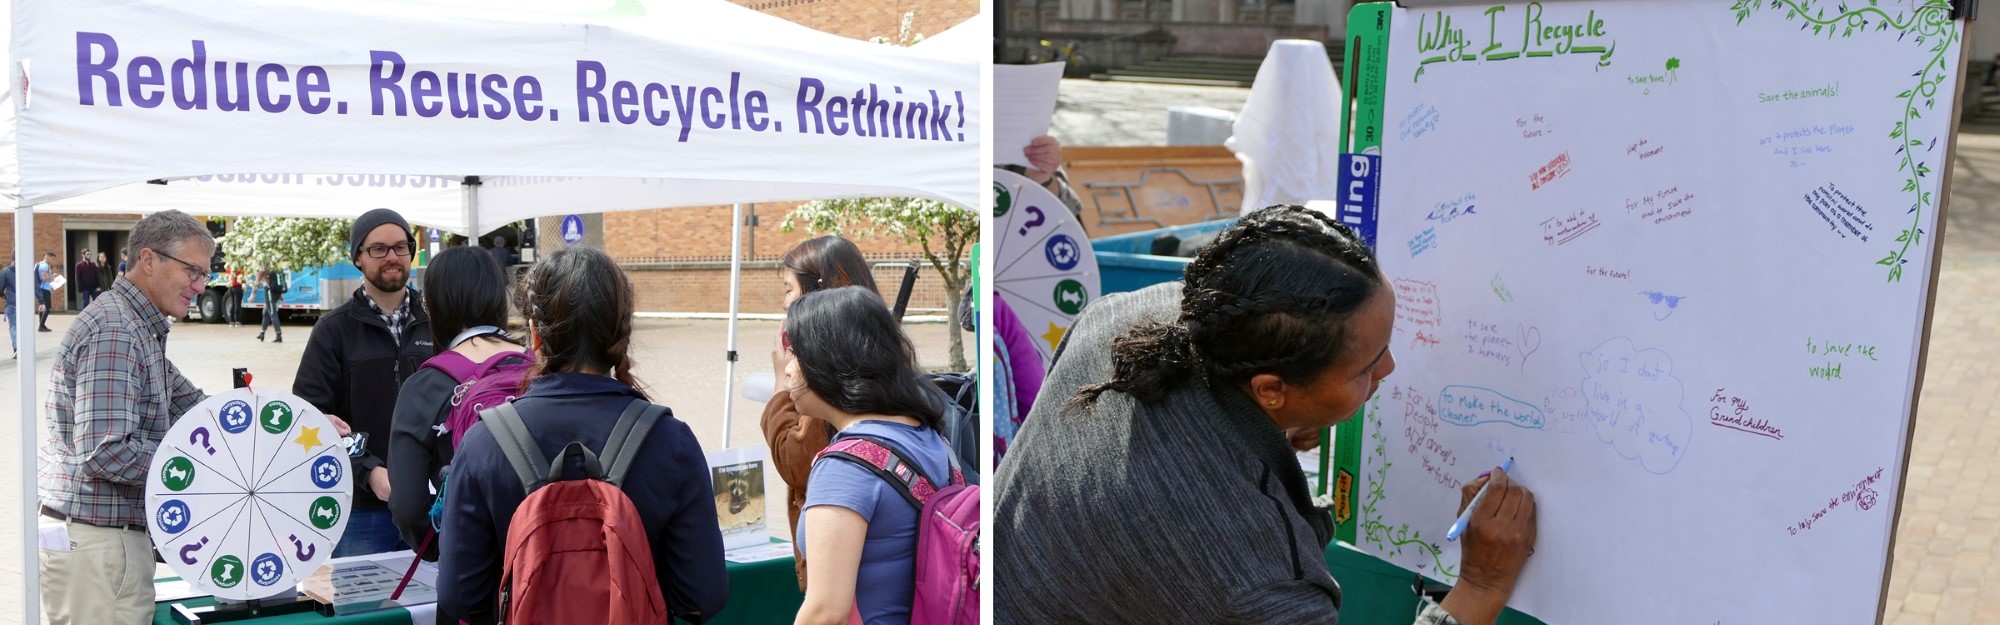 UW Recycling staff interact with visitors during tabling event. Visitors writing down why they recycle.